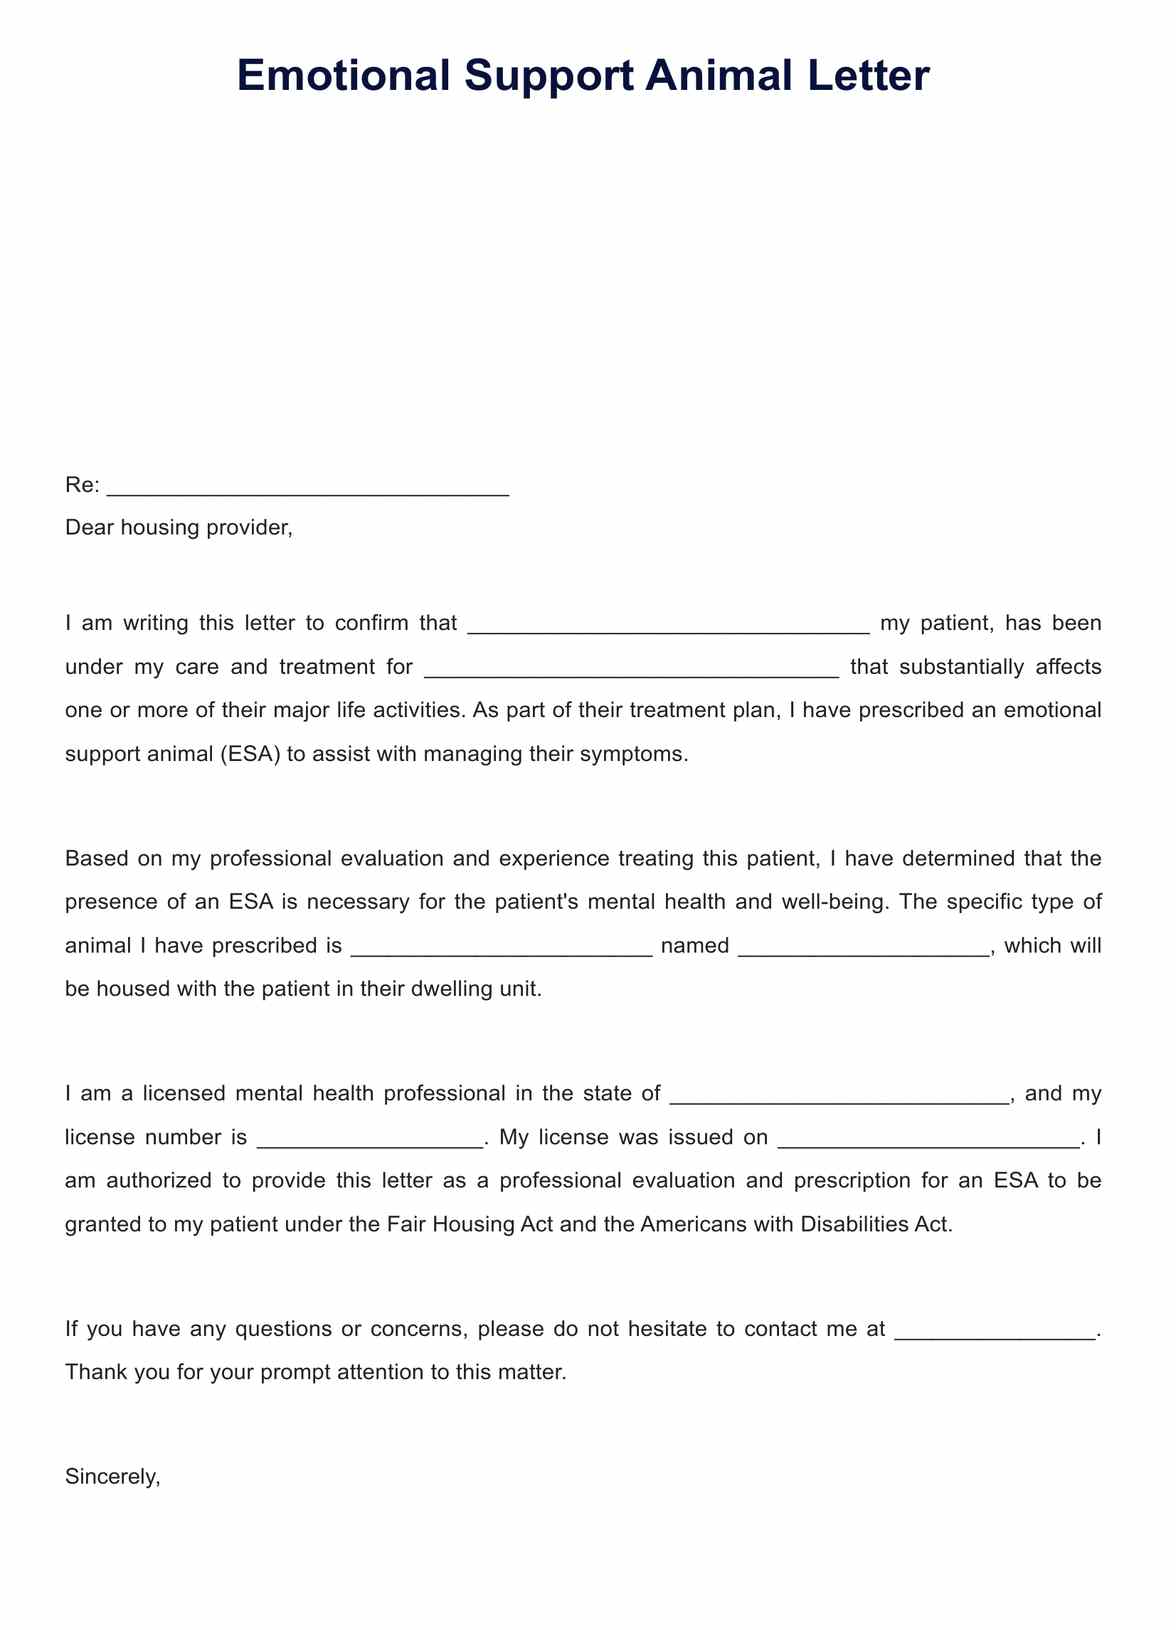 Emotional Support Animal Letter For Air Travel PDF Example